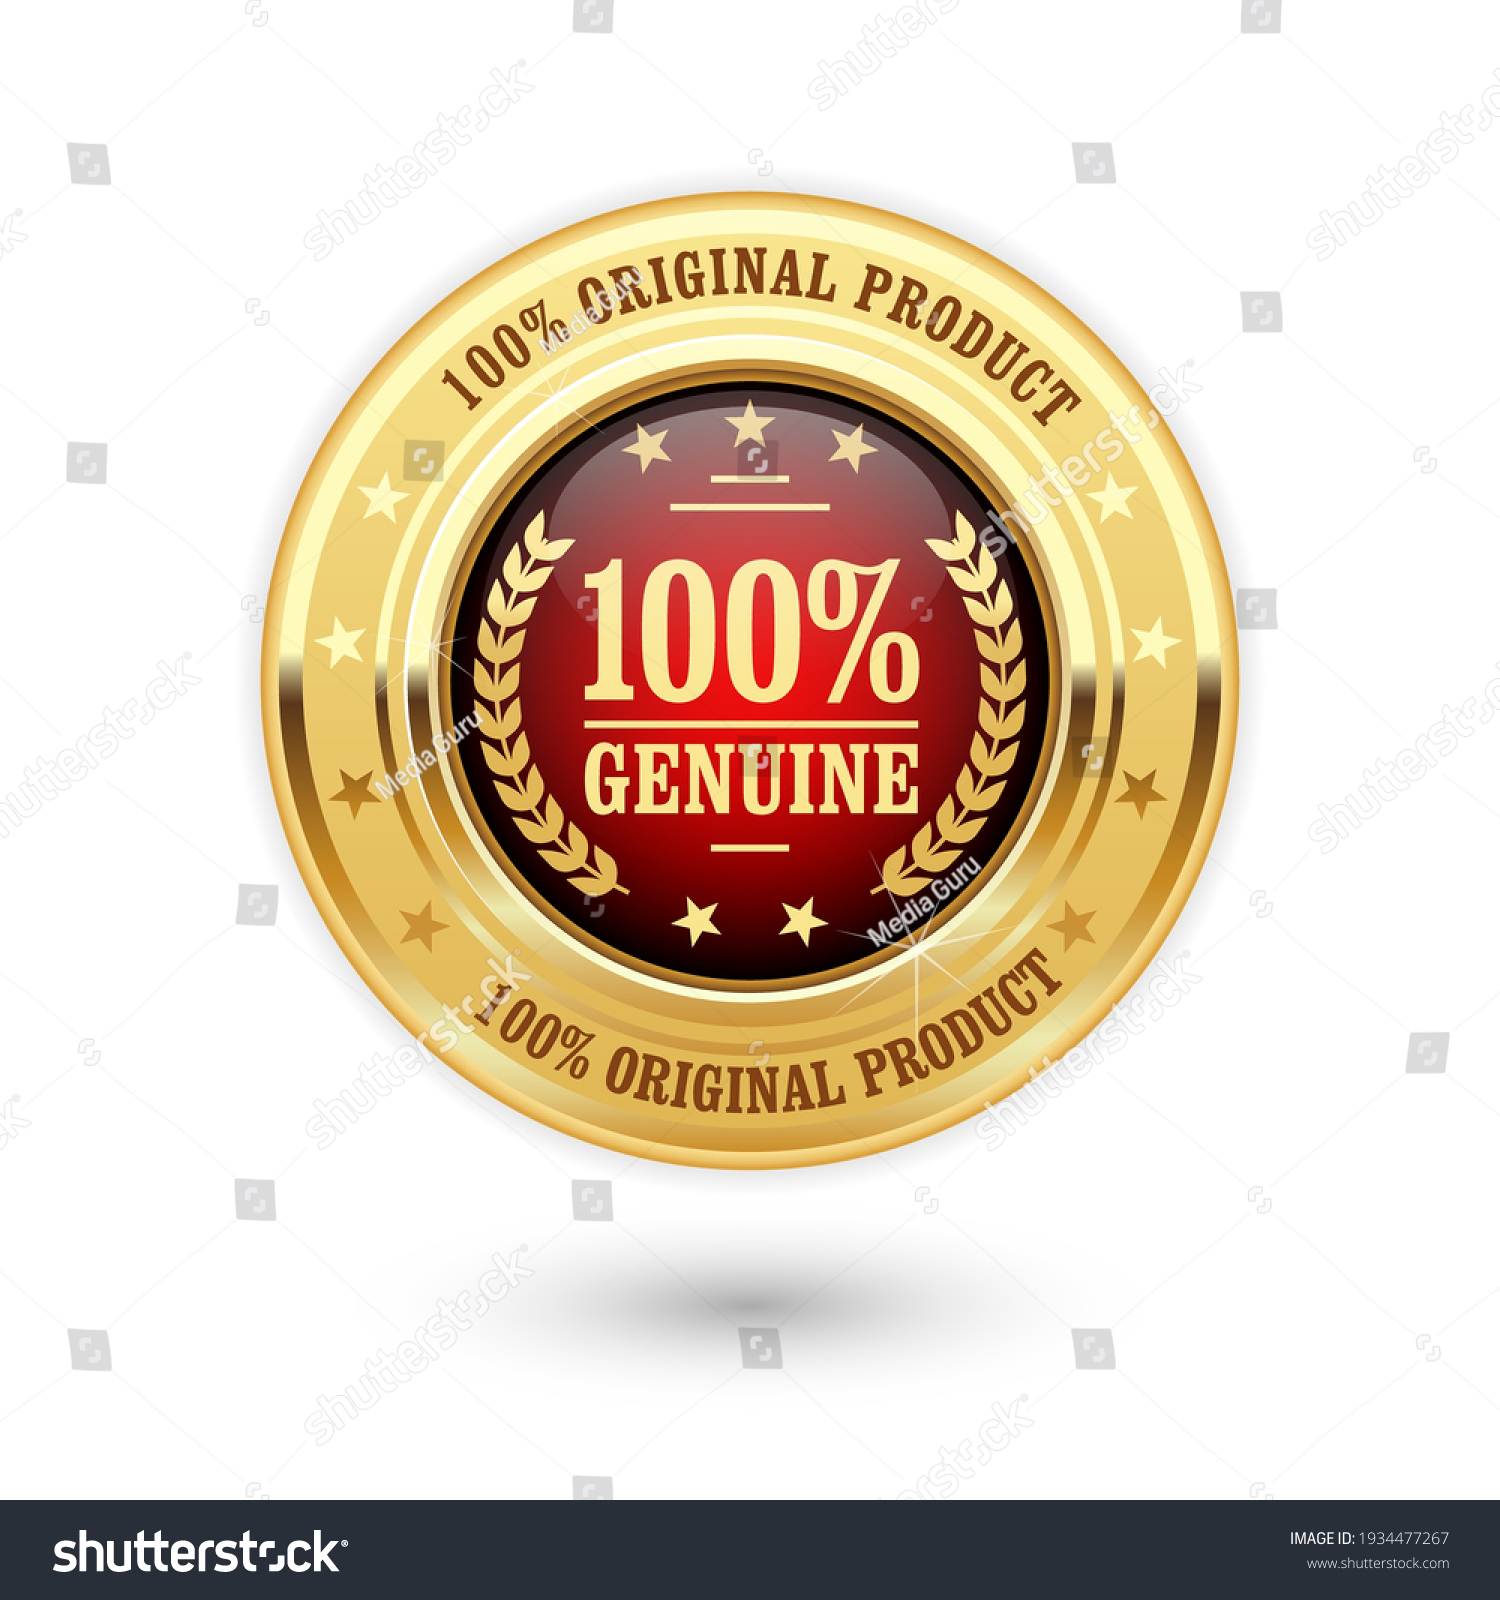 100 percent genuine product - golden insignia (medal) #1934477267